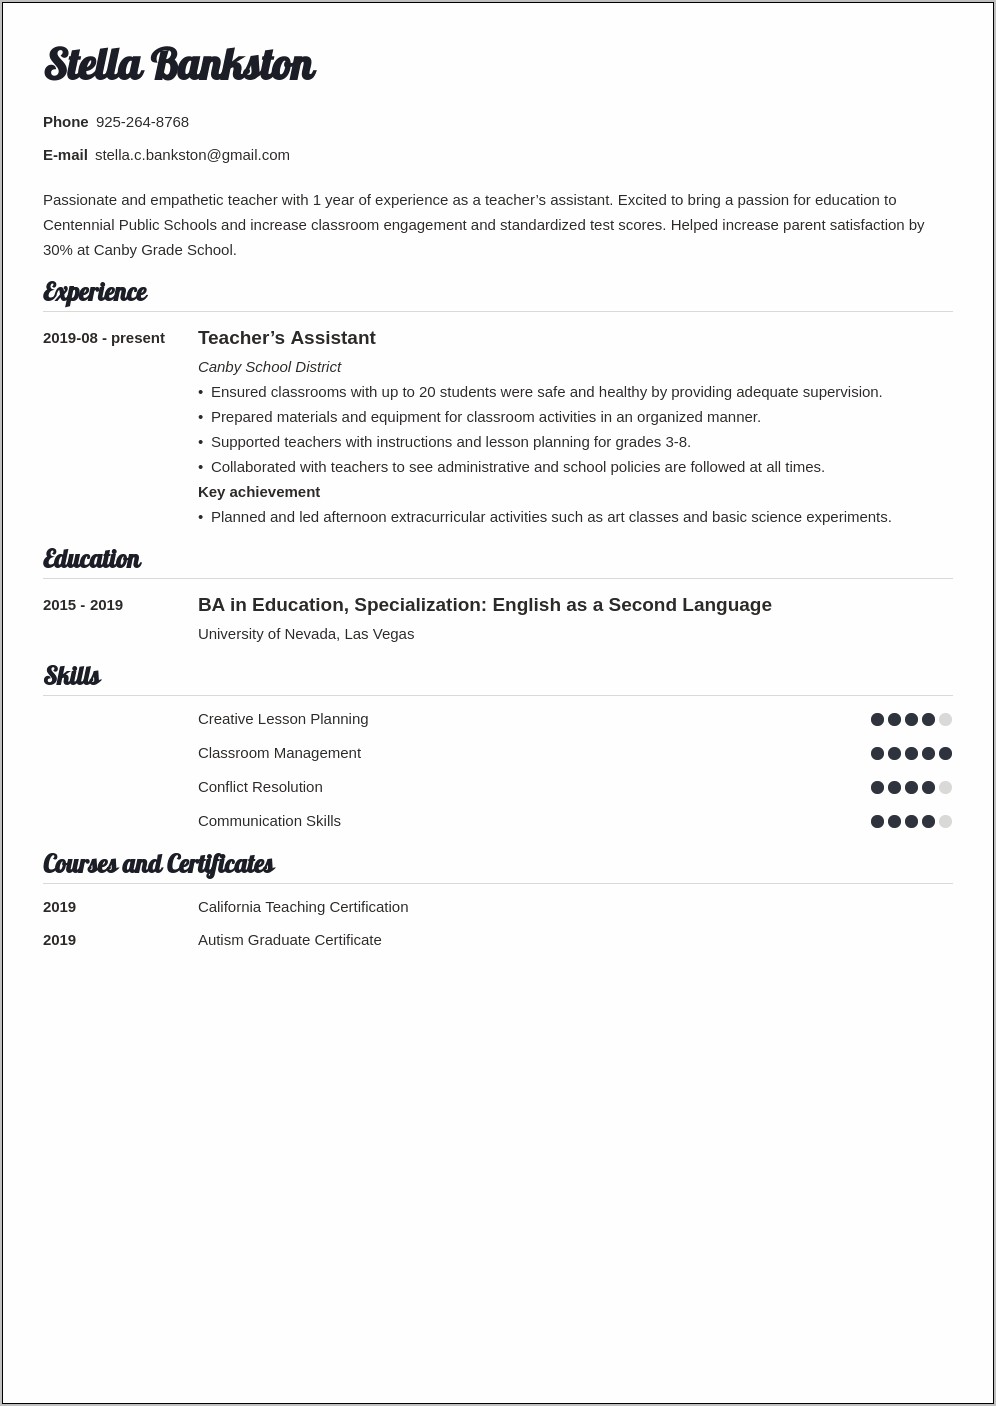 Example Resume For Teacher Experience